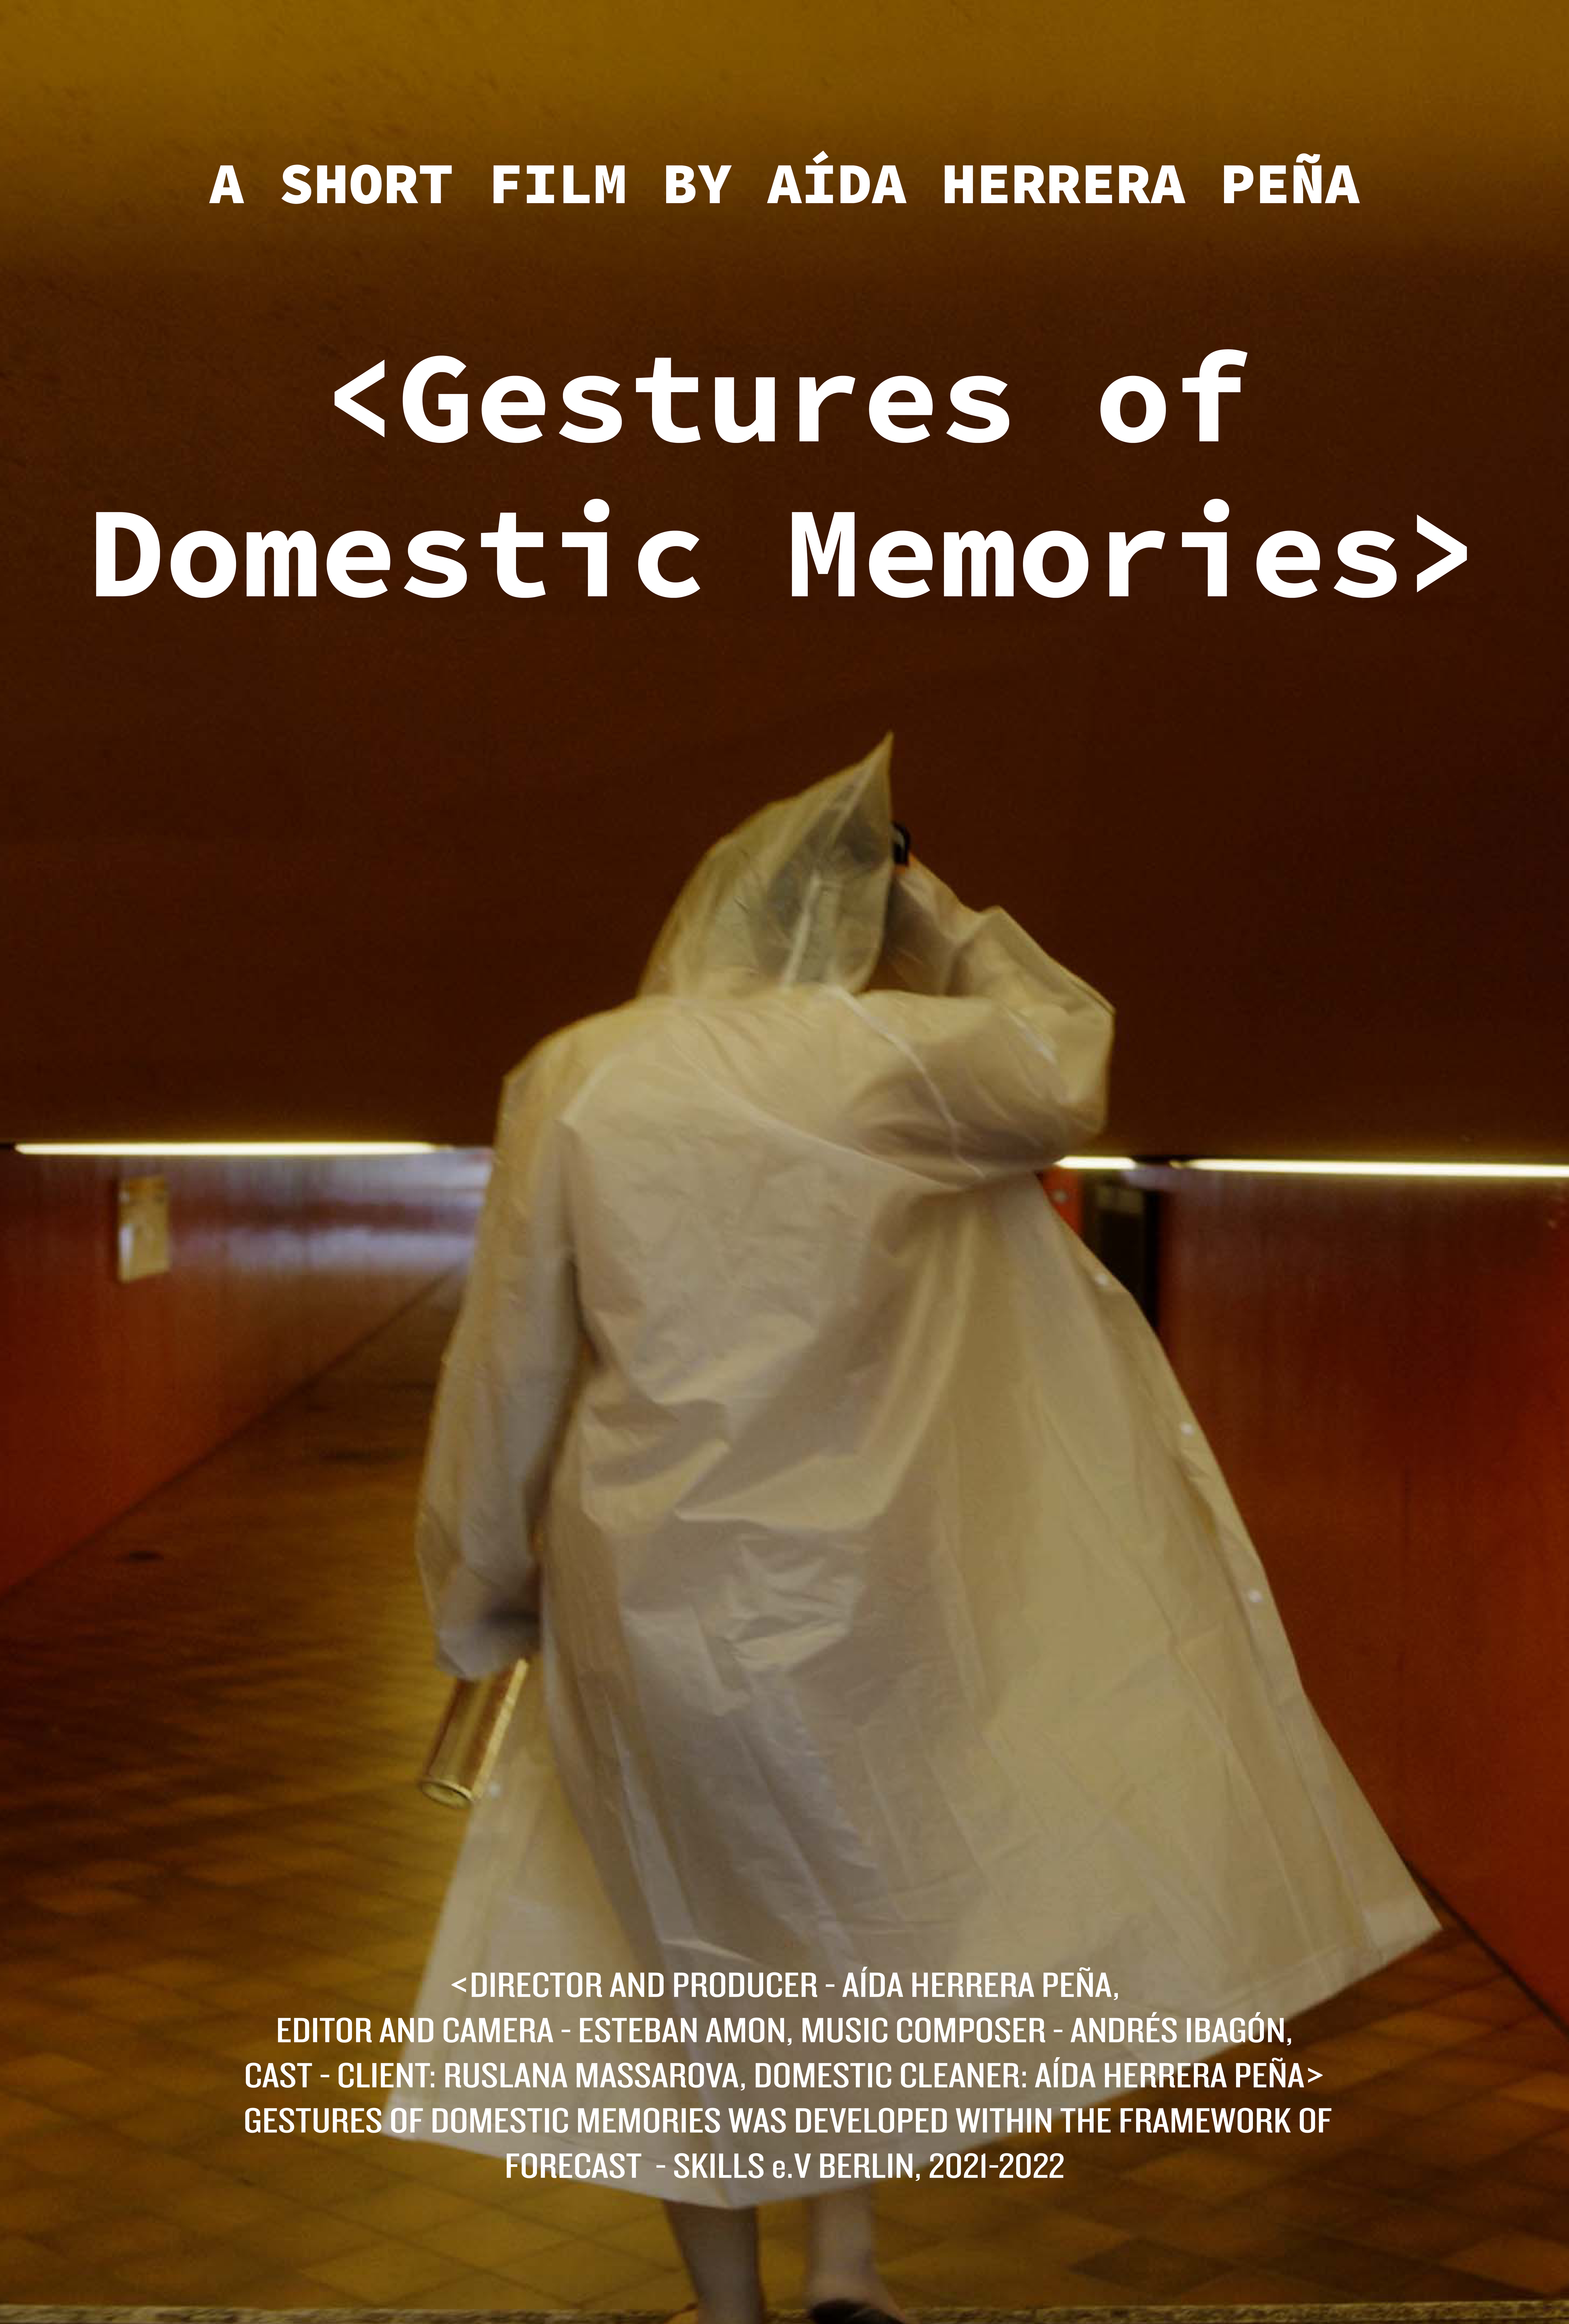 poster for <Gestures of Domestic Memories> a film by Aída Herrera Pena, image of a woman wearing a white raincoat walking through a tunnel